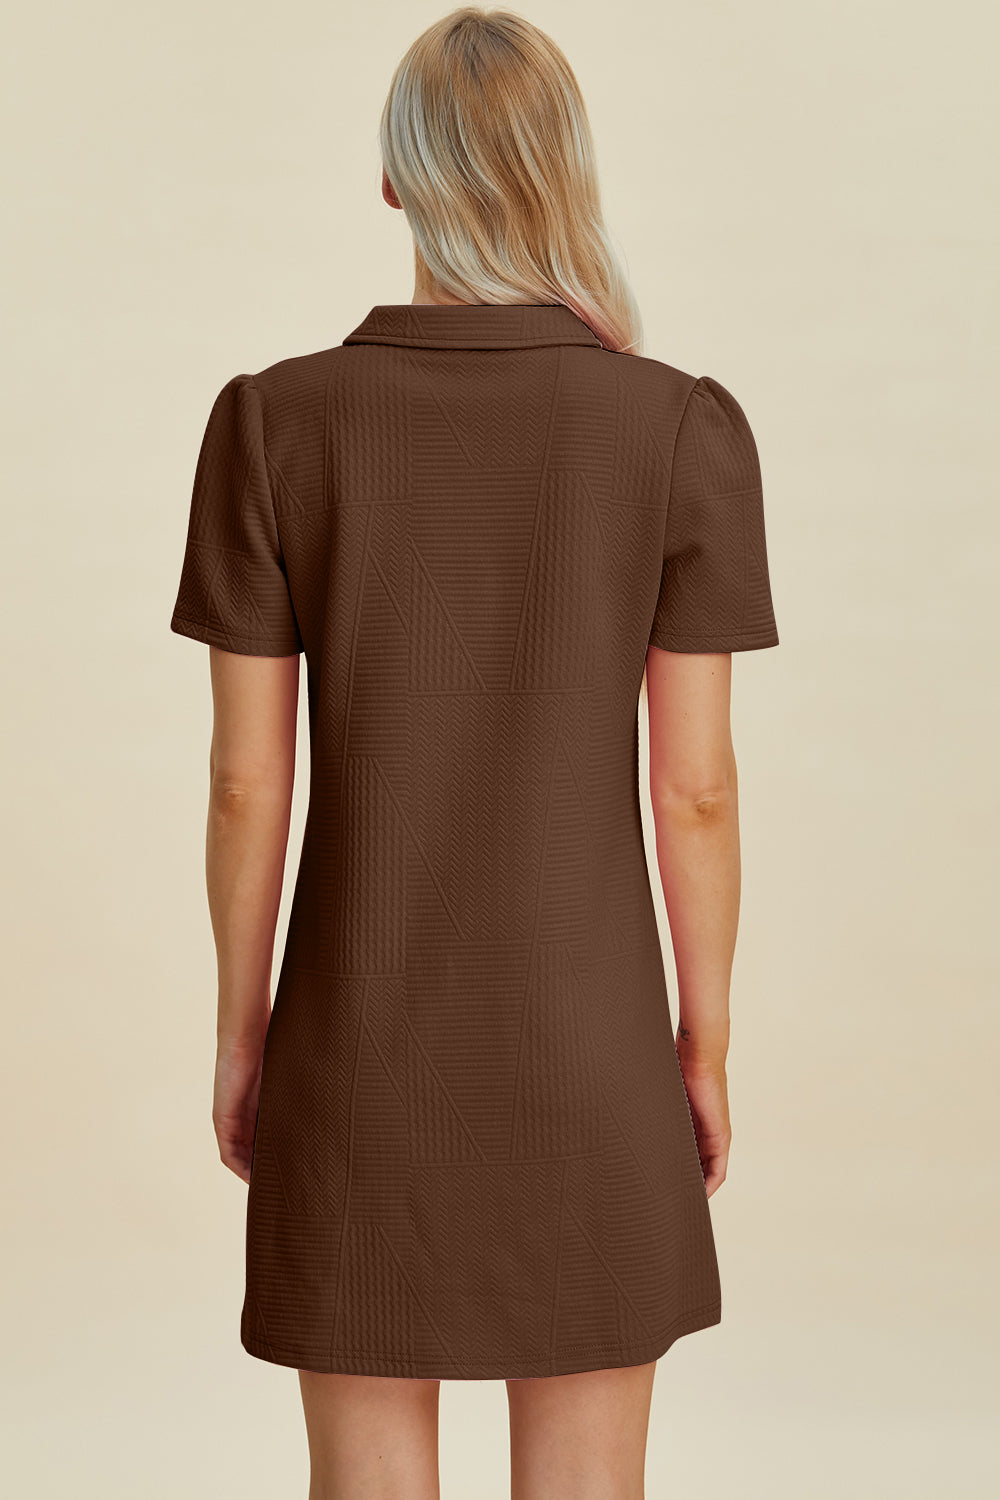 Brown dress with a unique textured fabric and elegant look